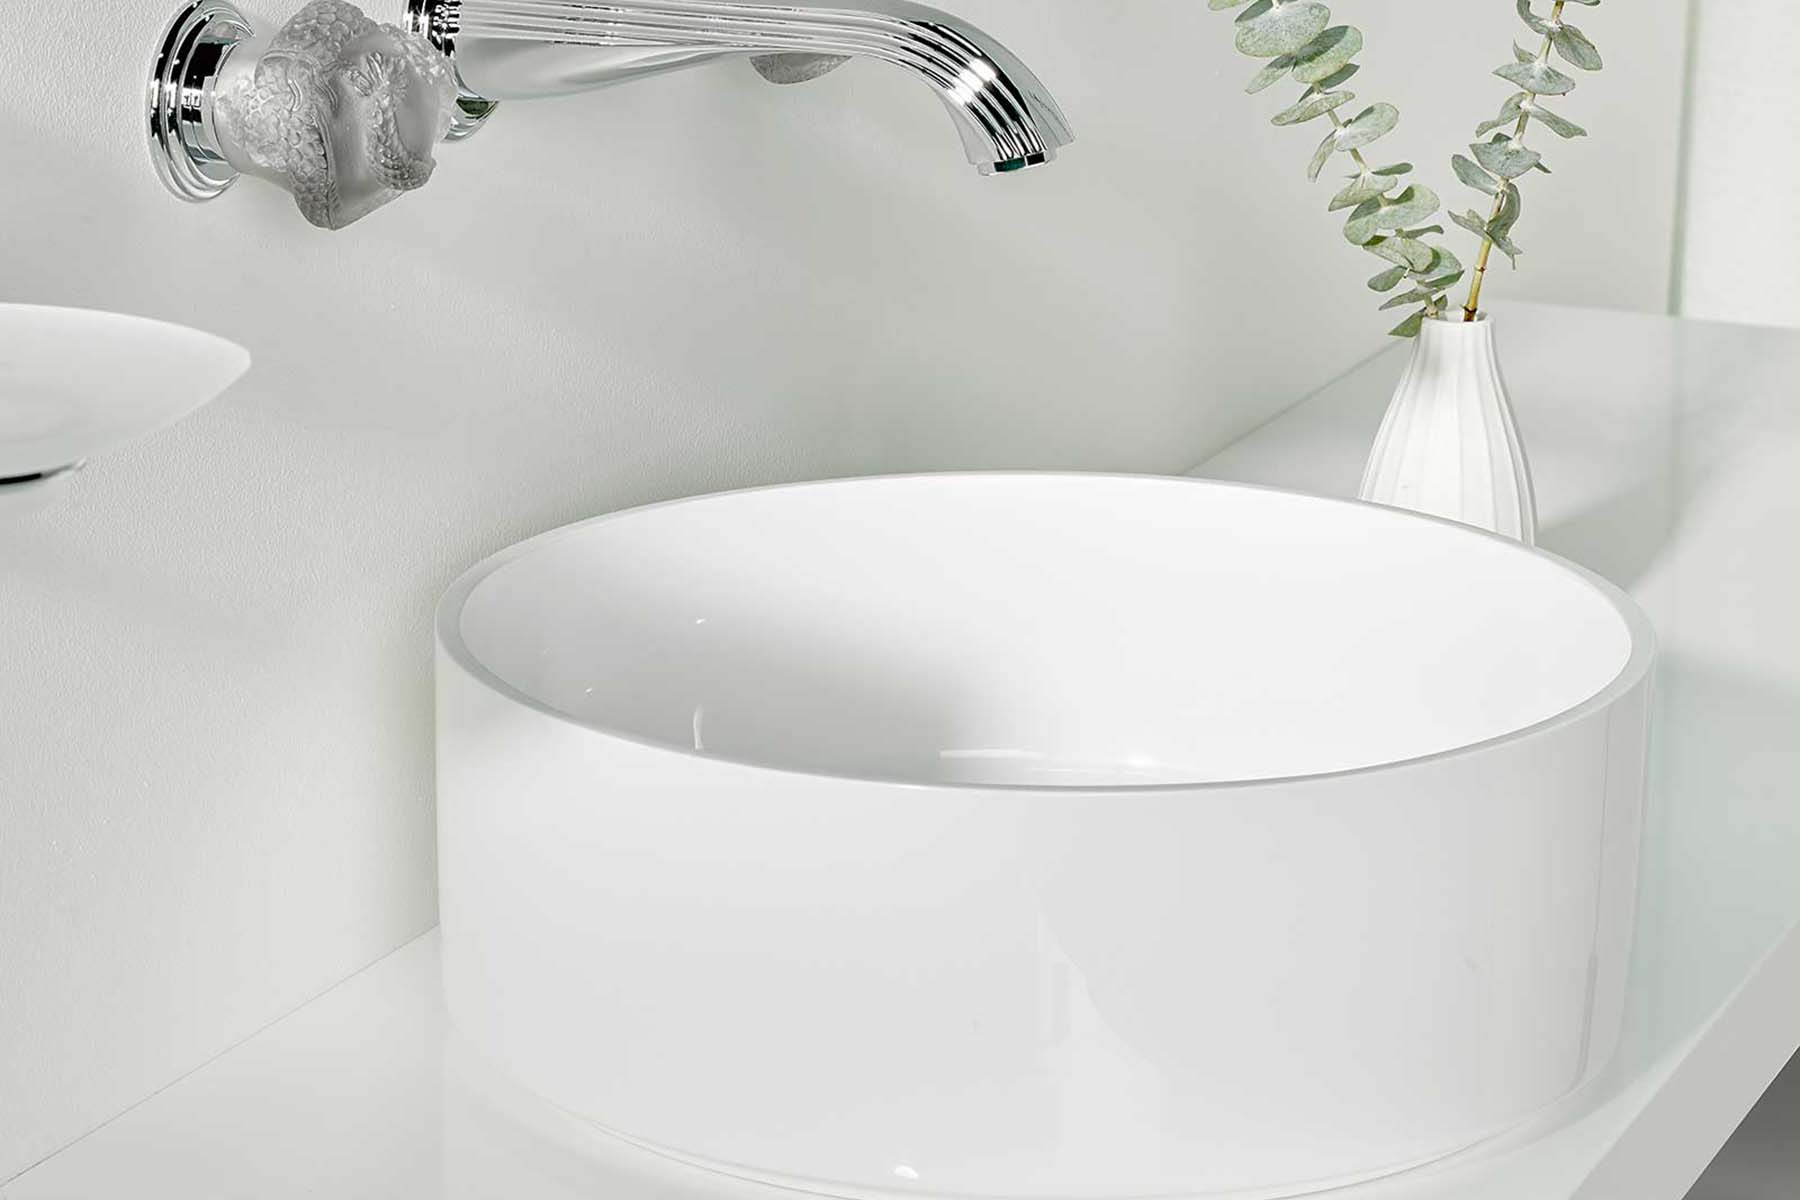 Bathroom Sinks Product Category Image